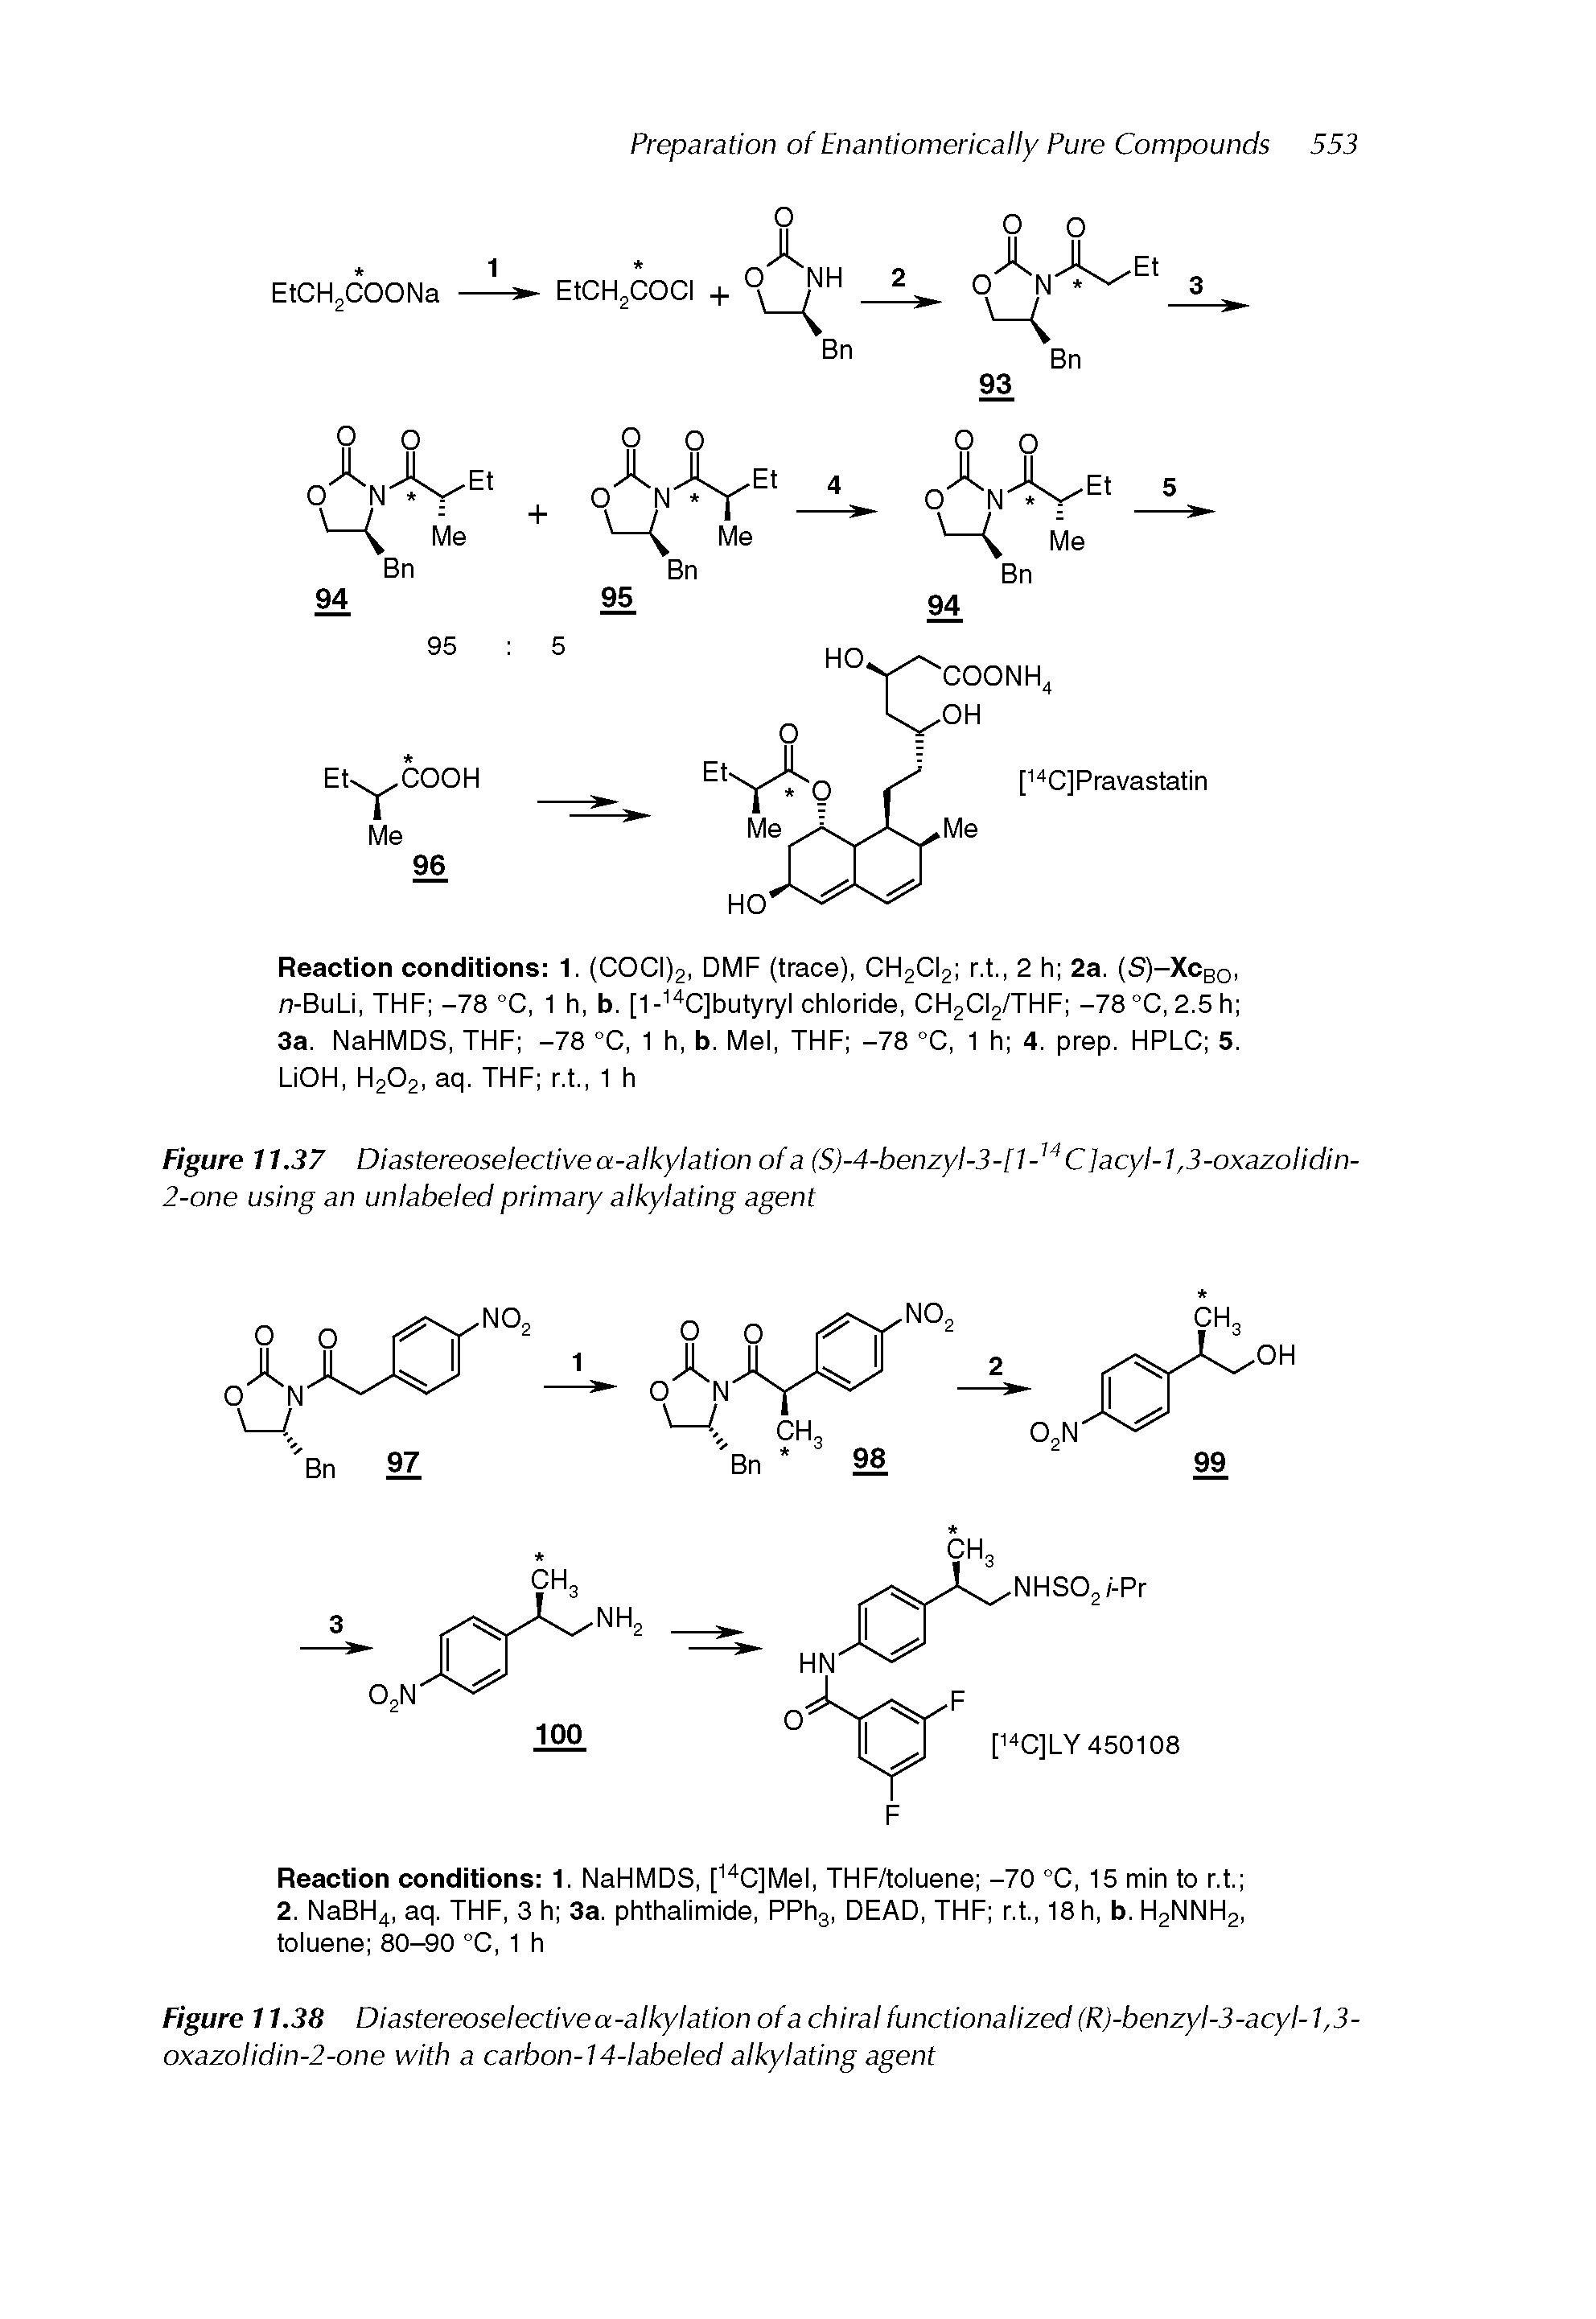 Figure 11.37 Diastereoselective a-alkylation of a (S)-4-benzyl-3-[ t- C ]acyl- 1,3-oxazolidin-2-one using an unlabeled primary alkylating agent...